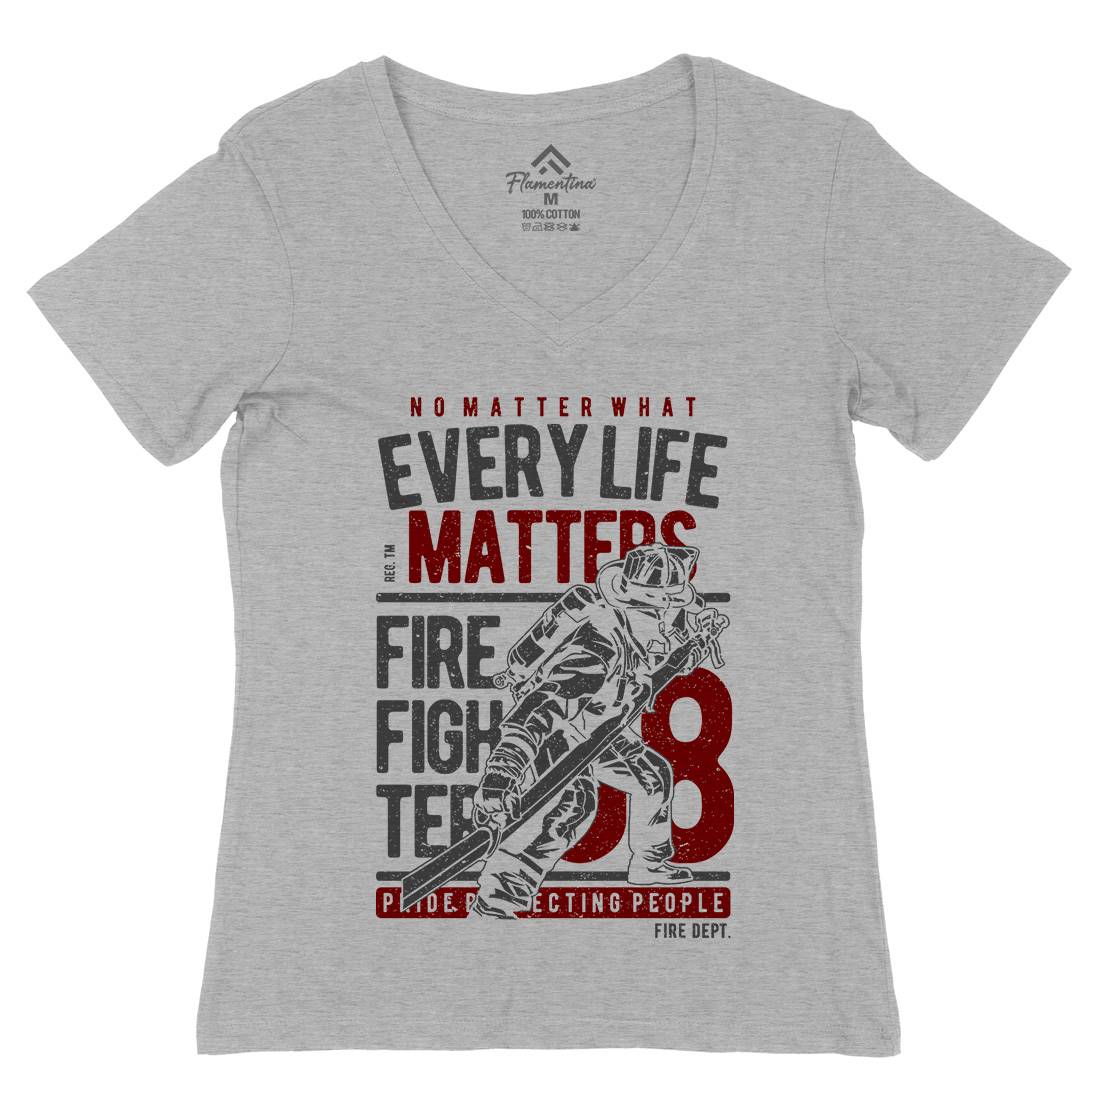 Every Life Matters Womens Organic V-Neck T-Shirt Firefighters A650